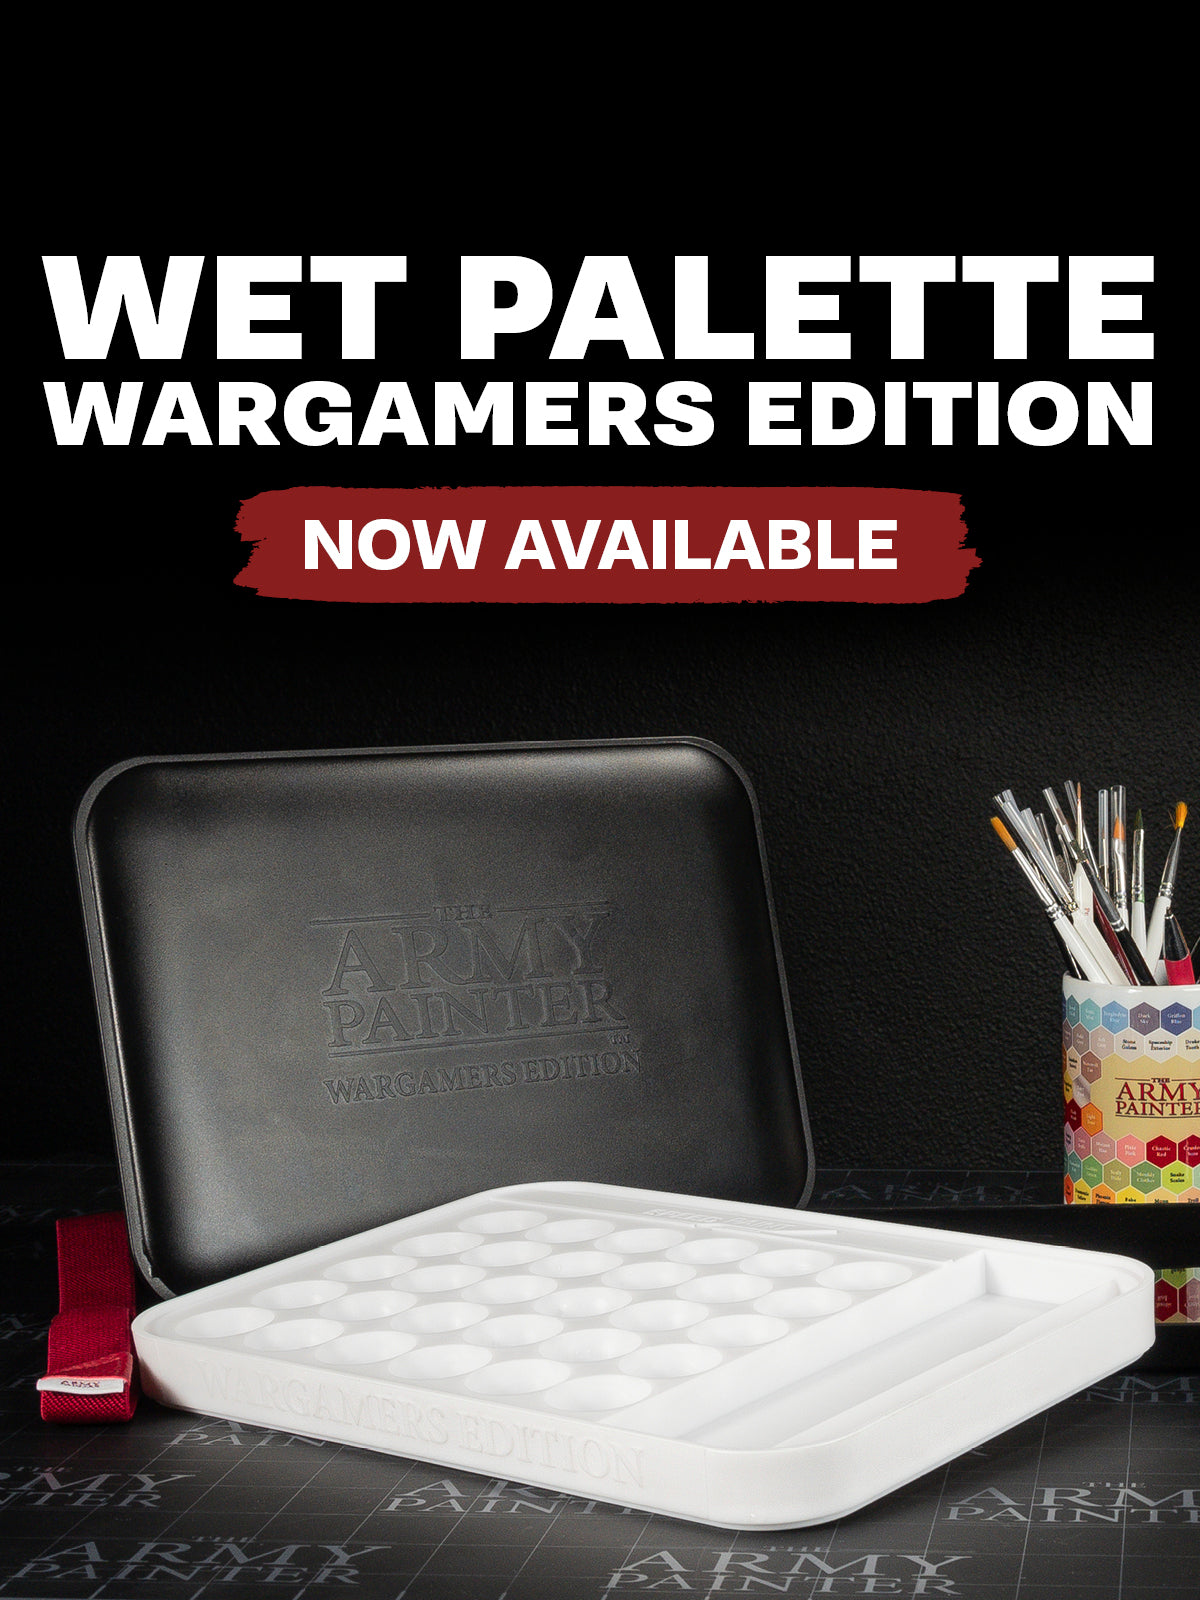 The Army Painter Wet Palette Set Hydro Sheets Wargaming Miniature Painting  5713799505100